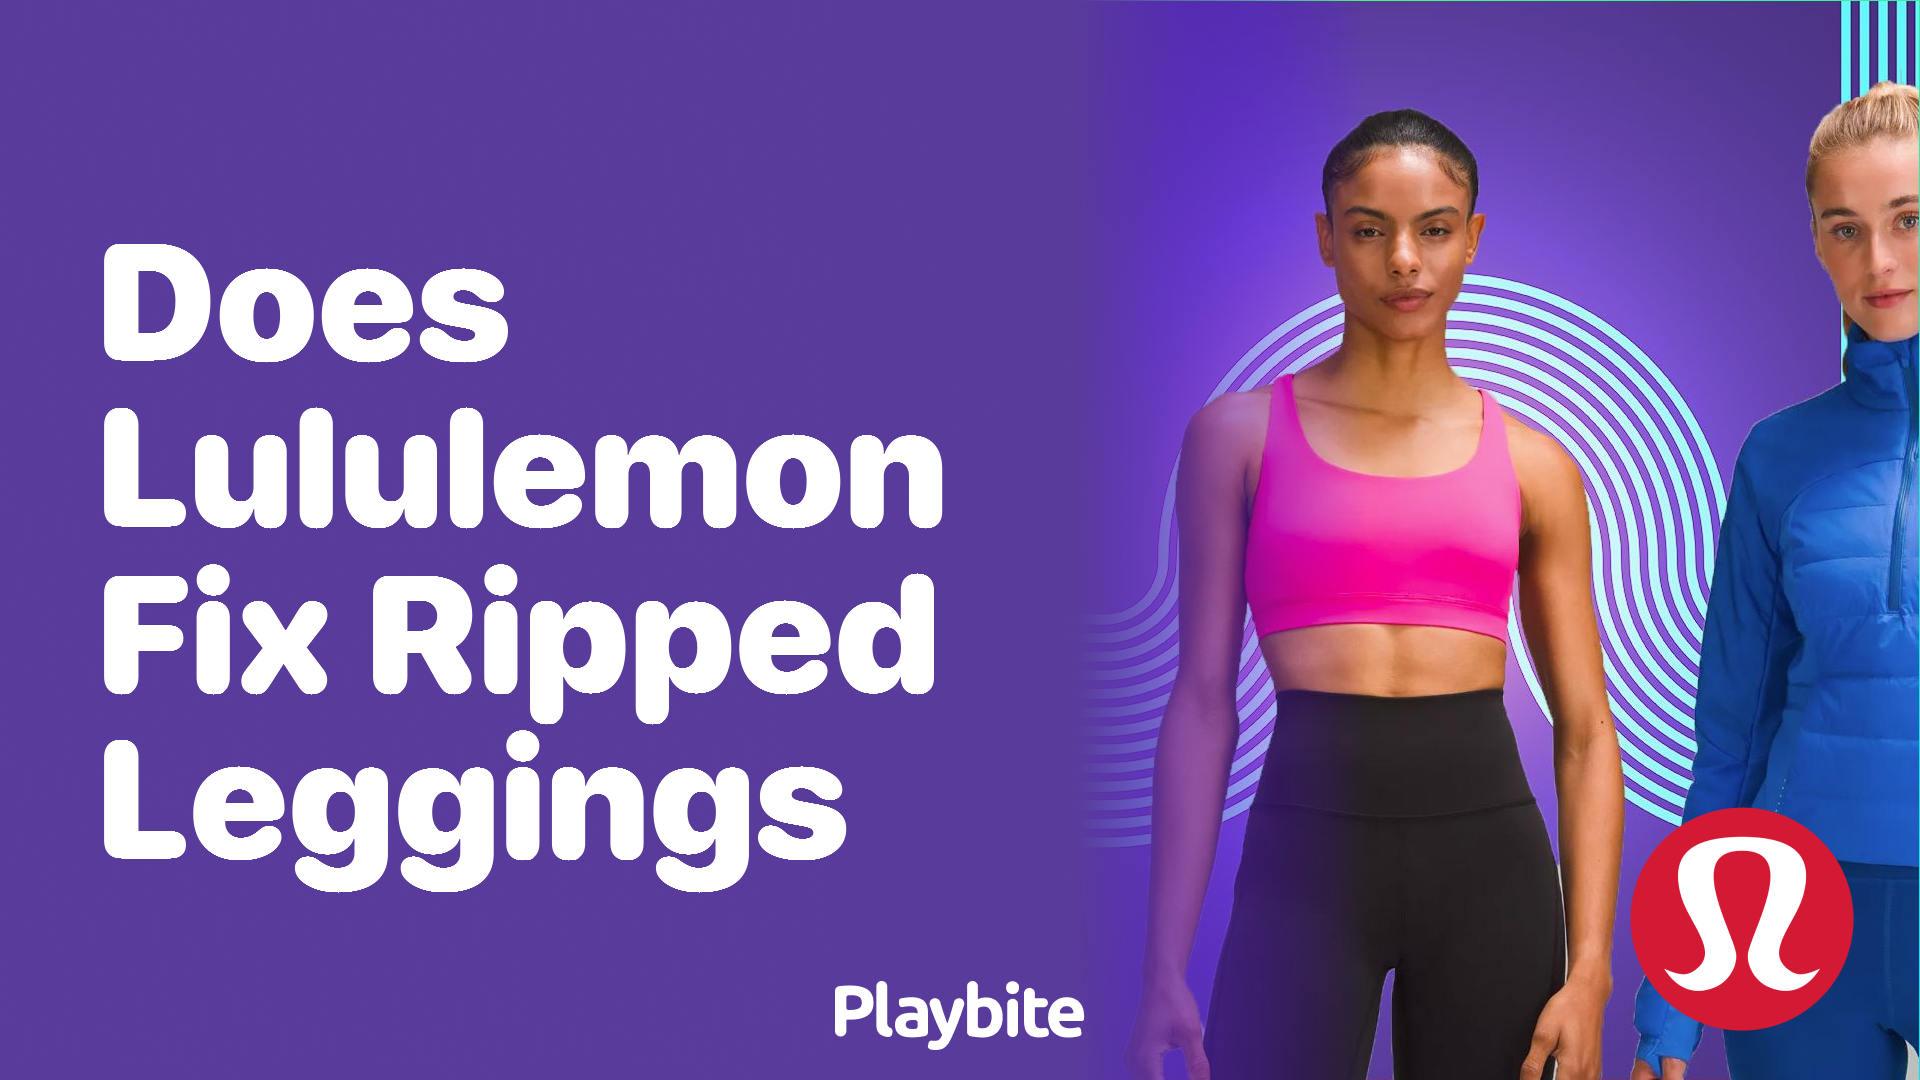 Does Lululemon Fix Ripped Leggings? Here's What You Need to Know - Playbite